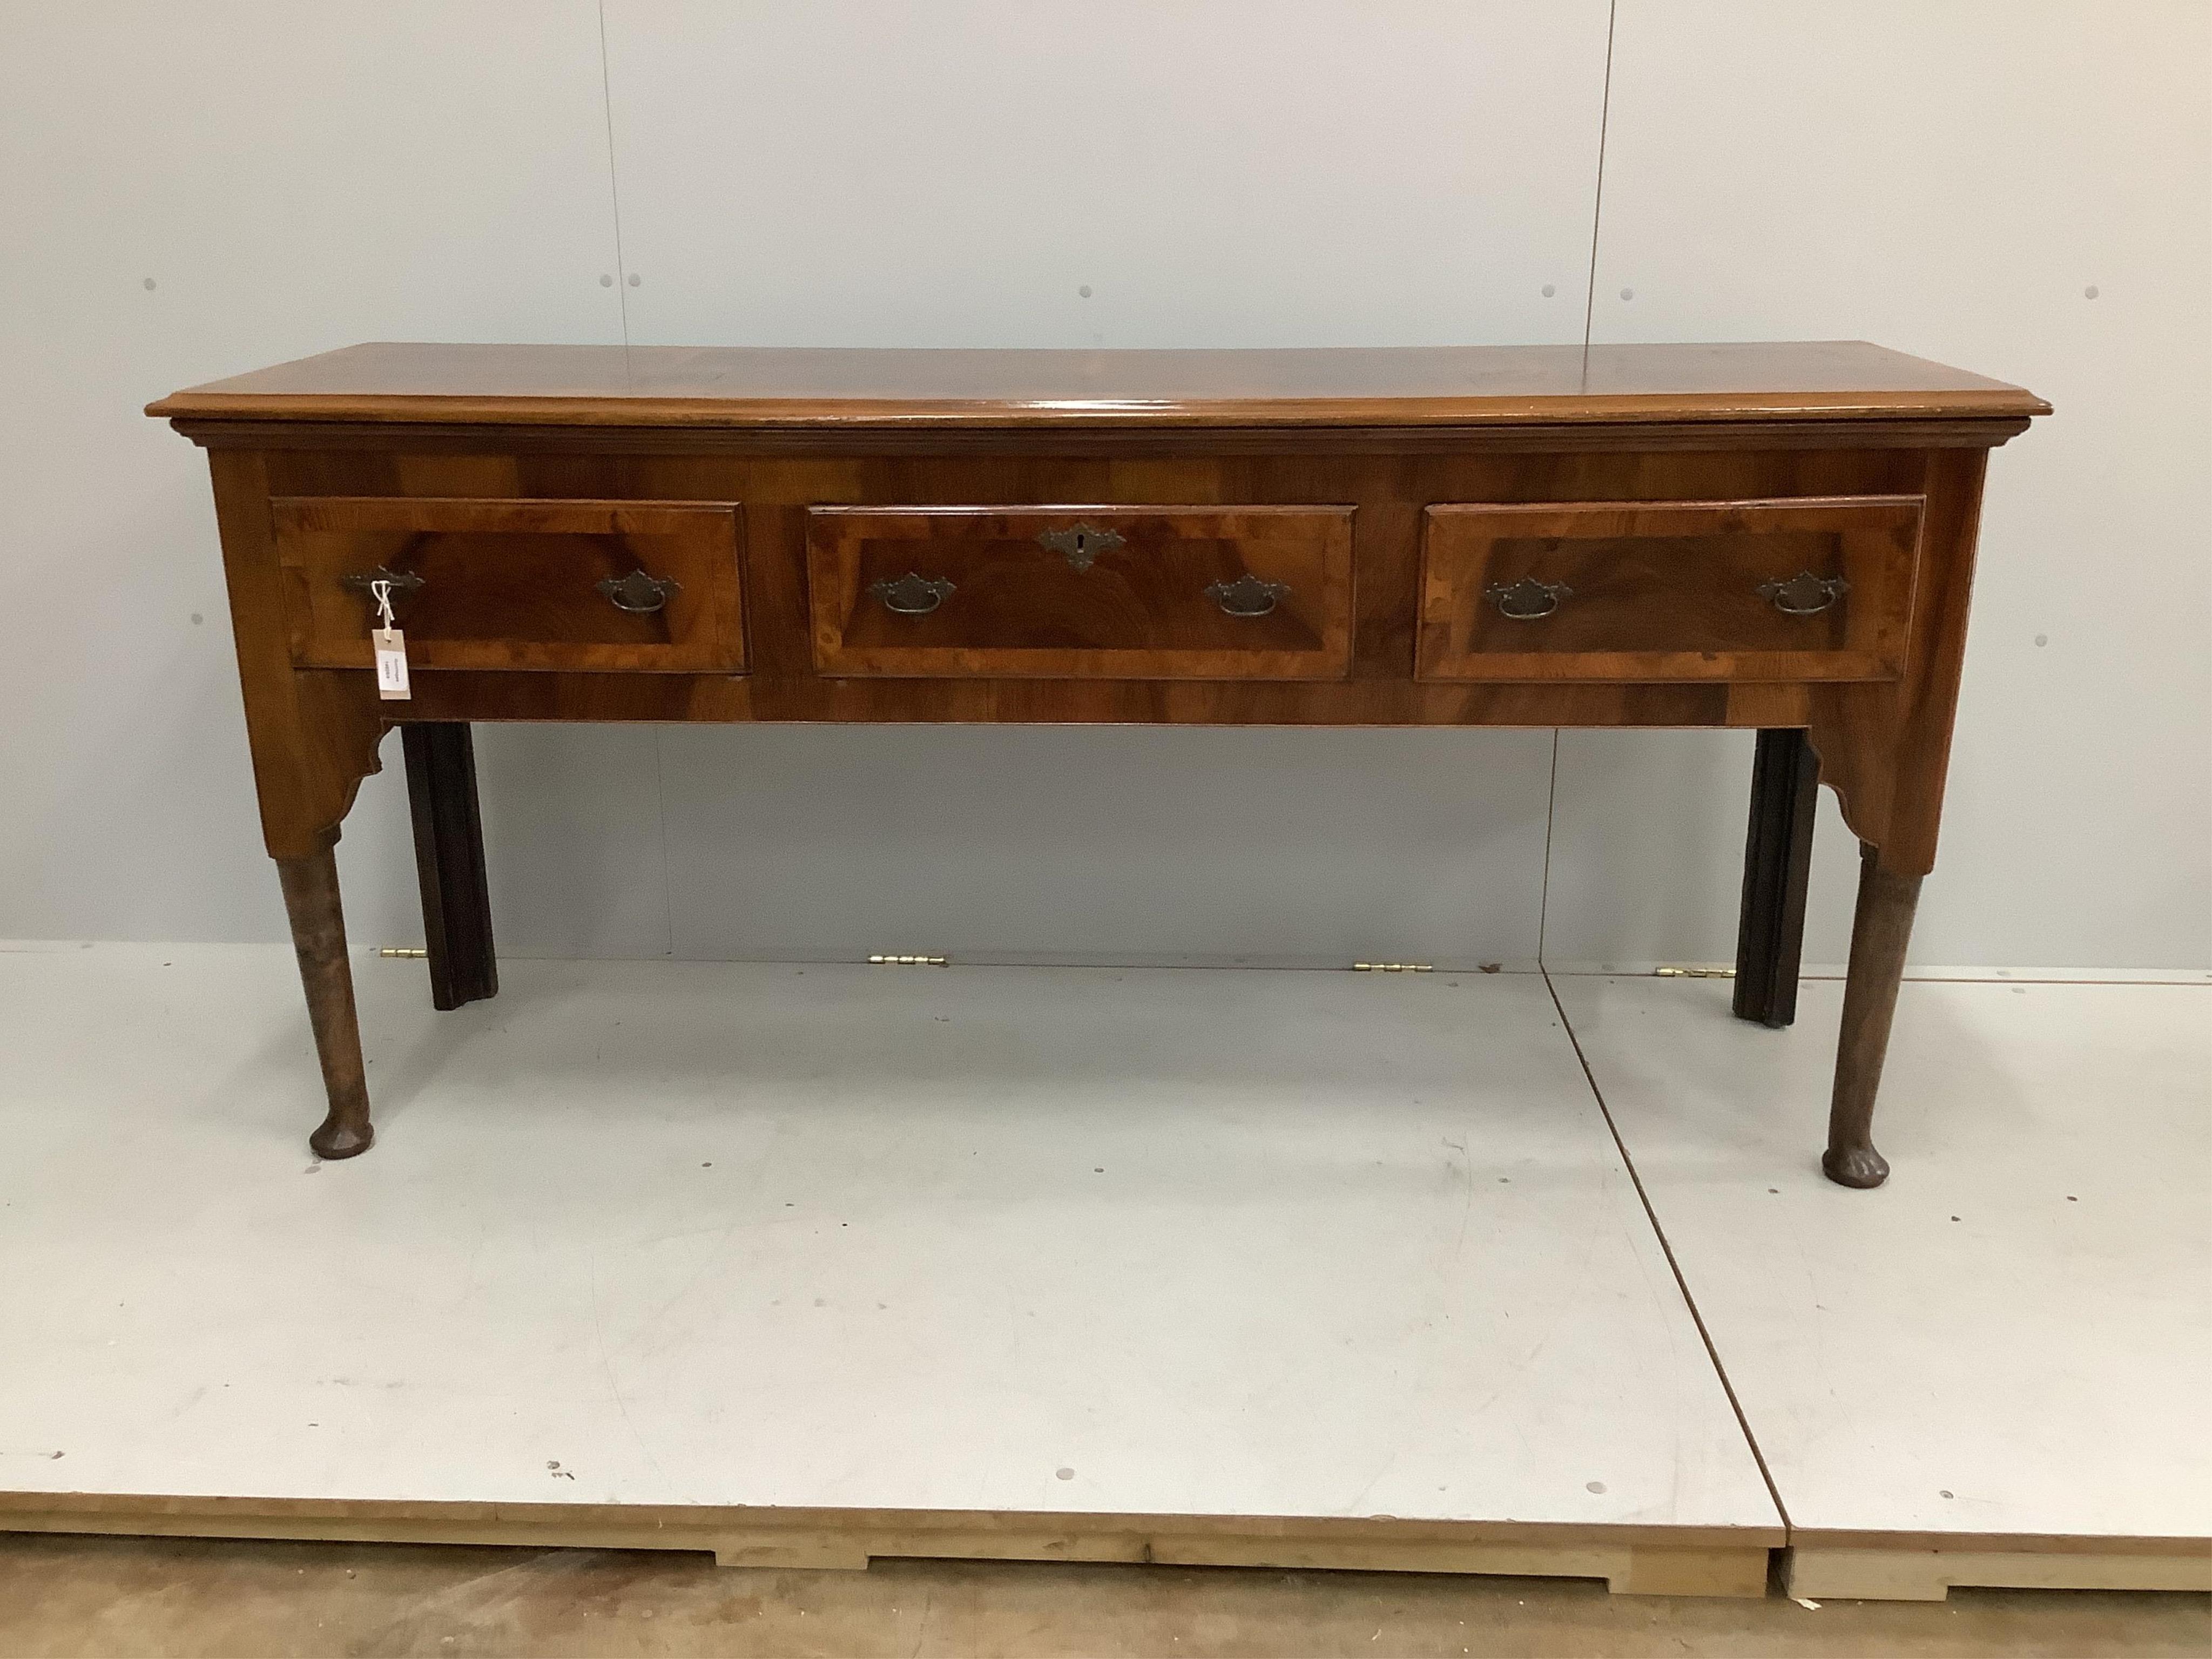 A George II style elm and burr walnut banded low dresser, width 182cm, depth 51cm, height 85cm. Condition - good